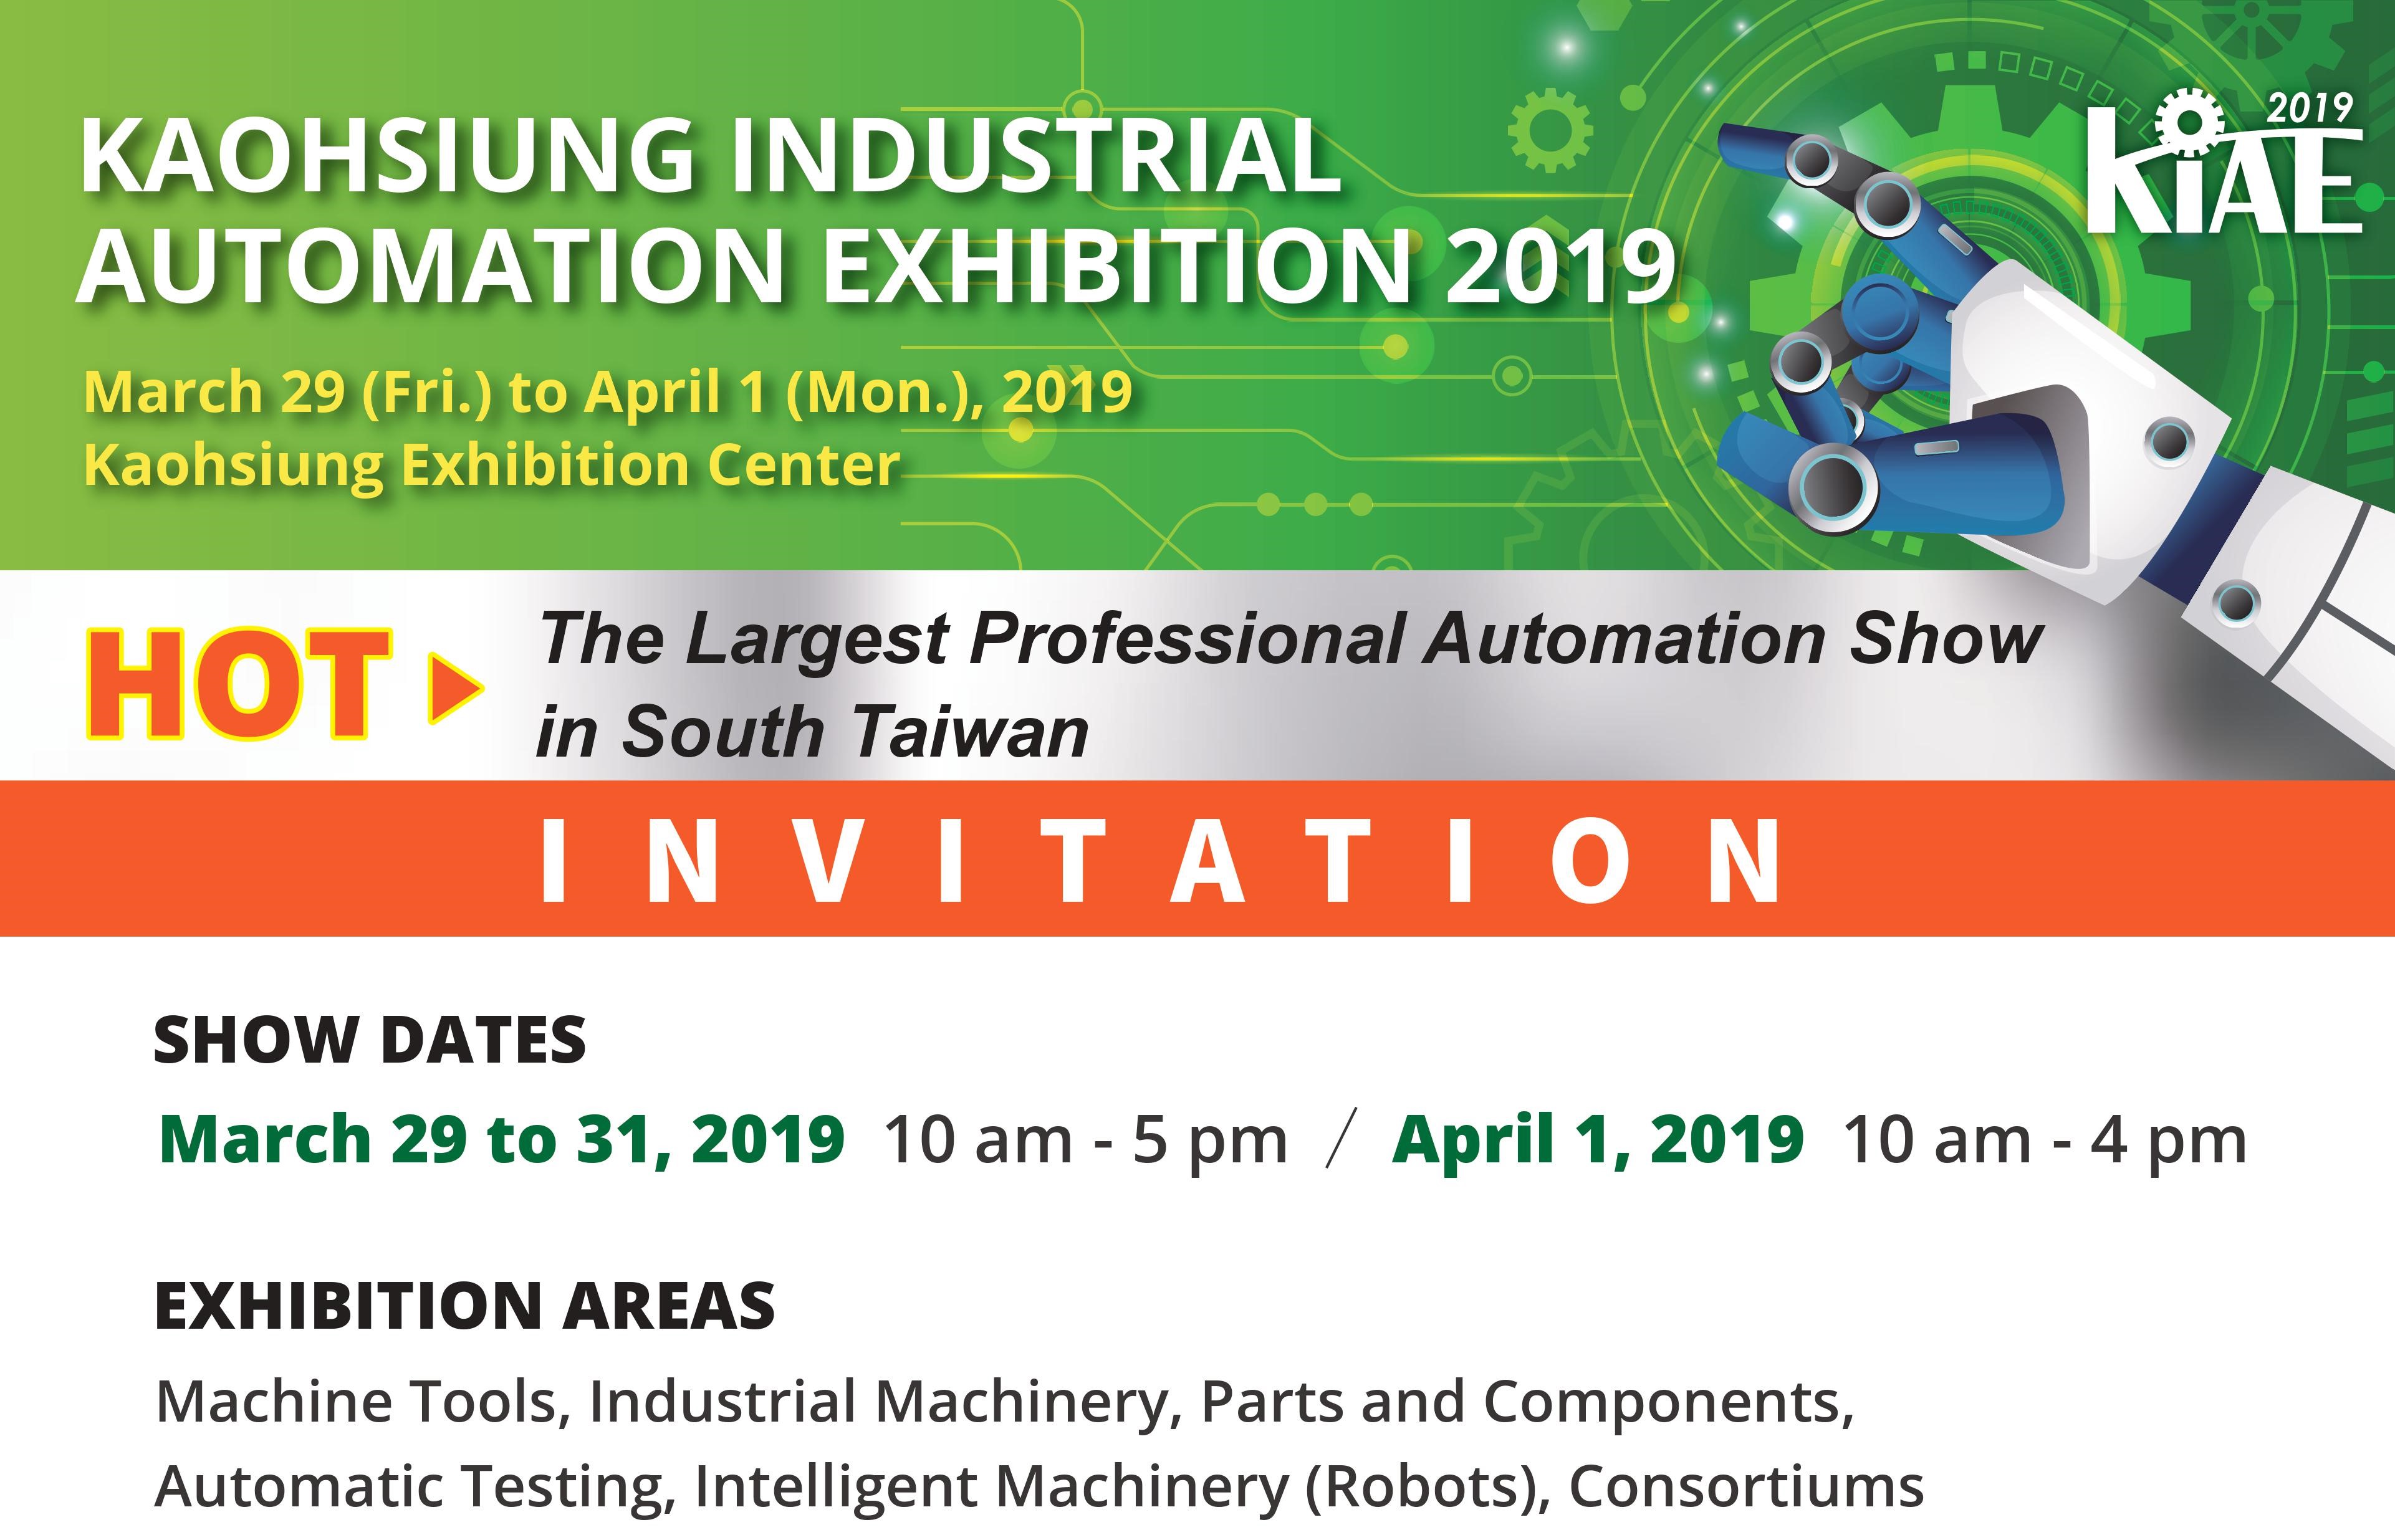 ind_images/Exhibitions/2019/20190329_Kaohsiung_International_Industrial_Automation_Exhibition_2.jpg